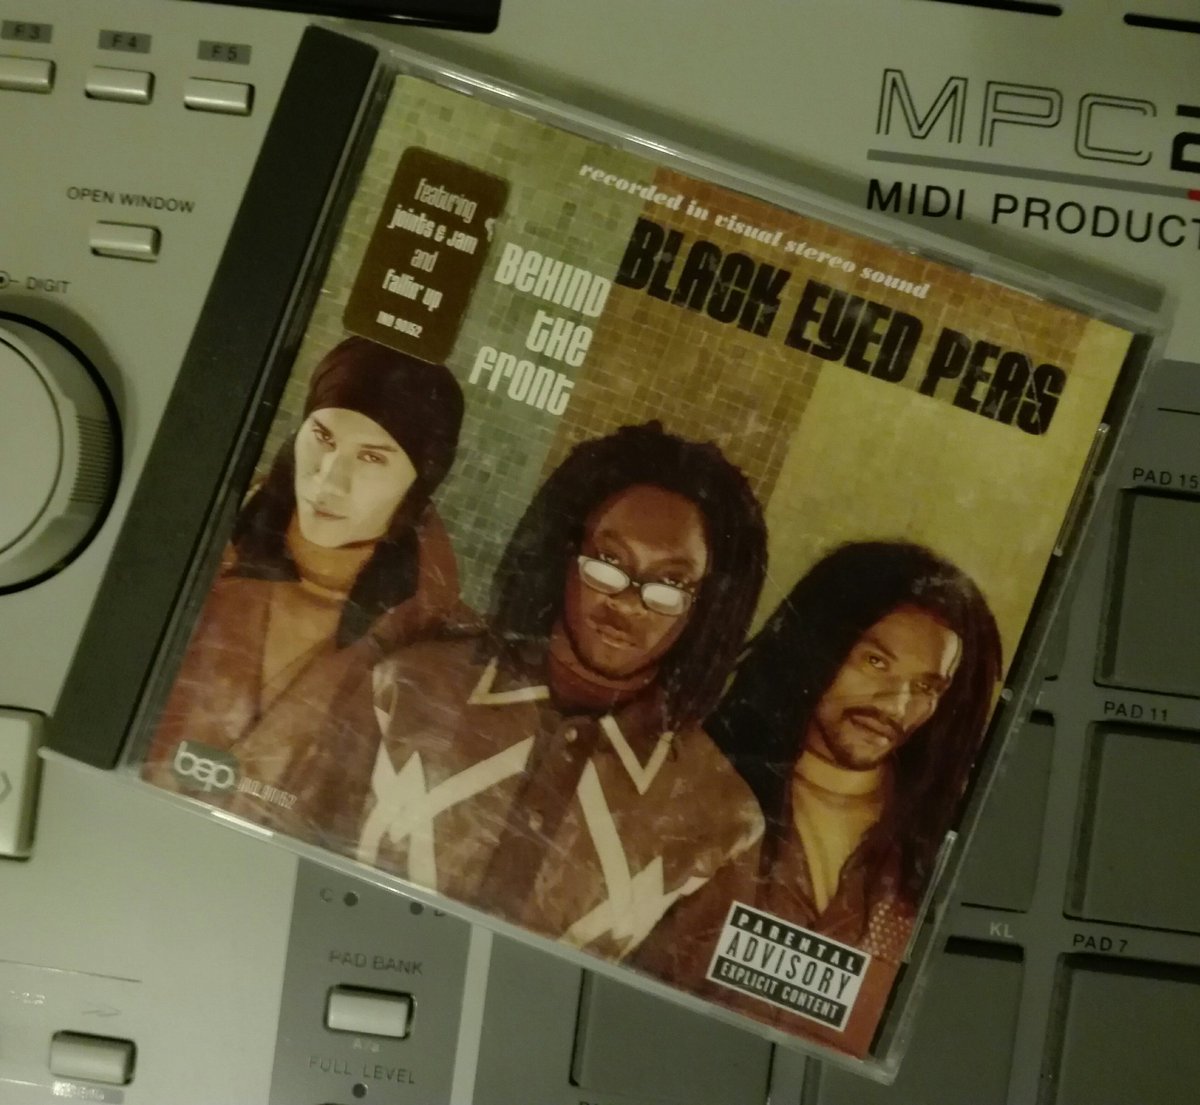 20 years ago @iamwill @apldeap & @TabBep had such a rich, soulful and alternative sound with #behindthefront - a hint of that native tongues/ hieroglyphics flavor... #tbt #blackeyedpeas #realhiphop #goodmusic #positivity #1998